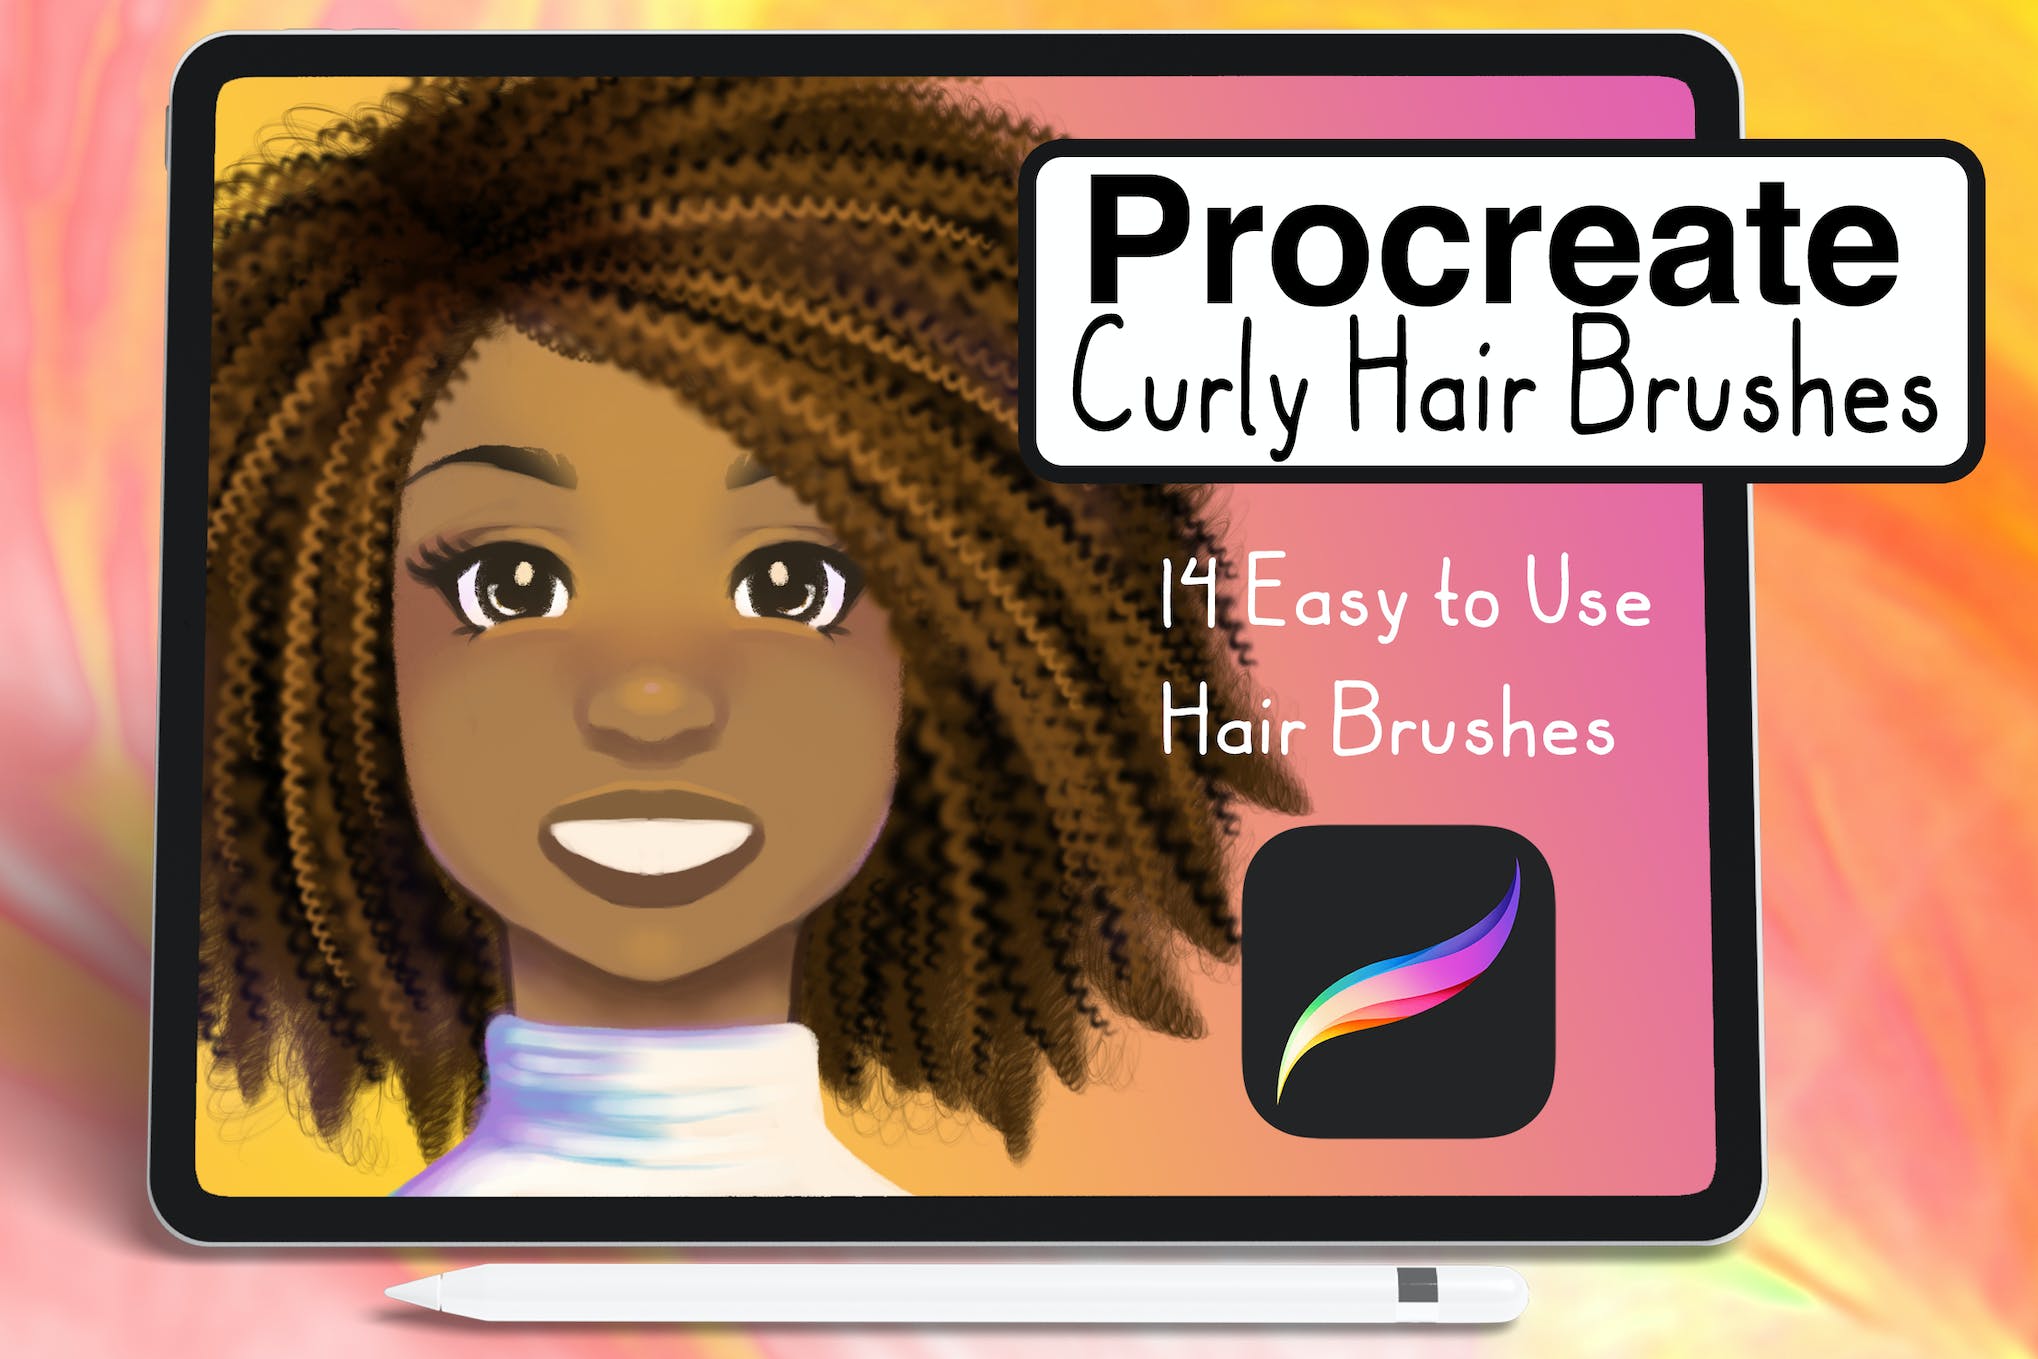 Curly Hair Brushes for Procreate